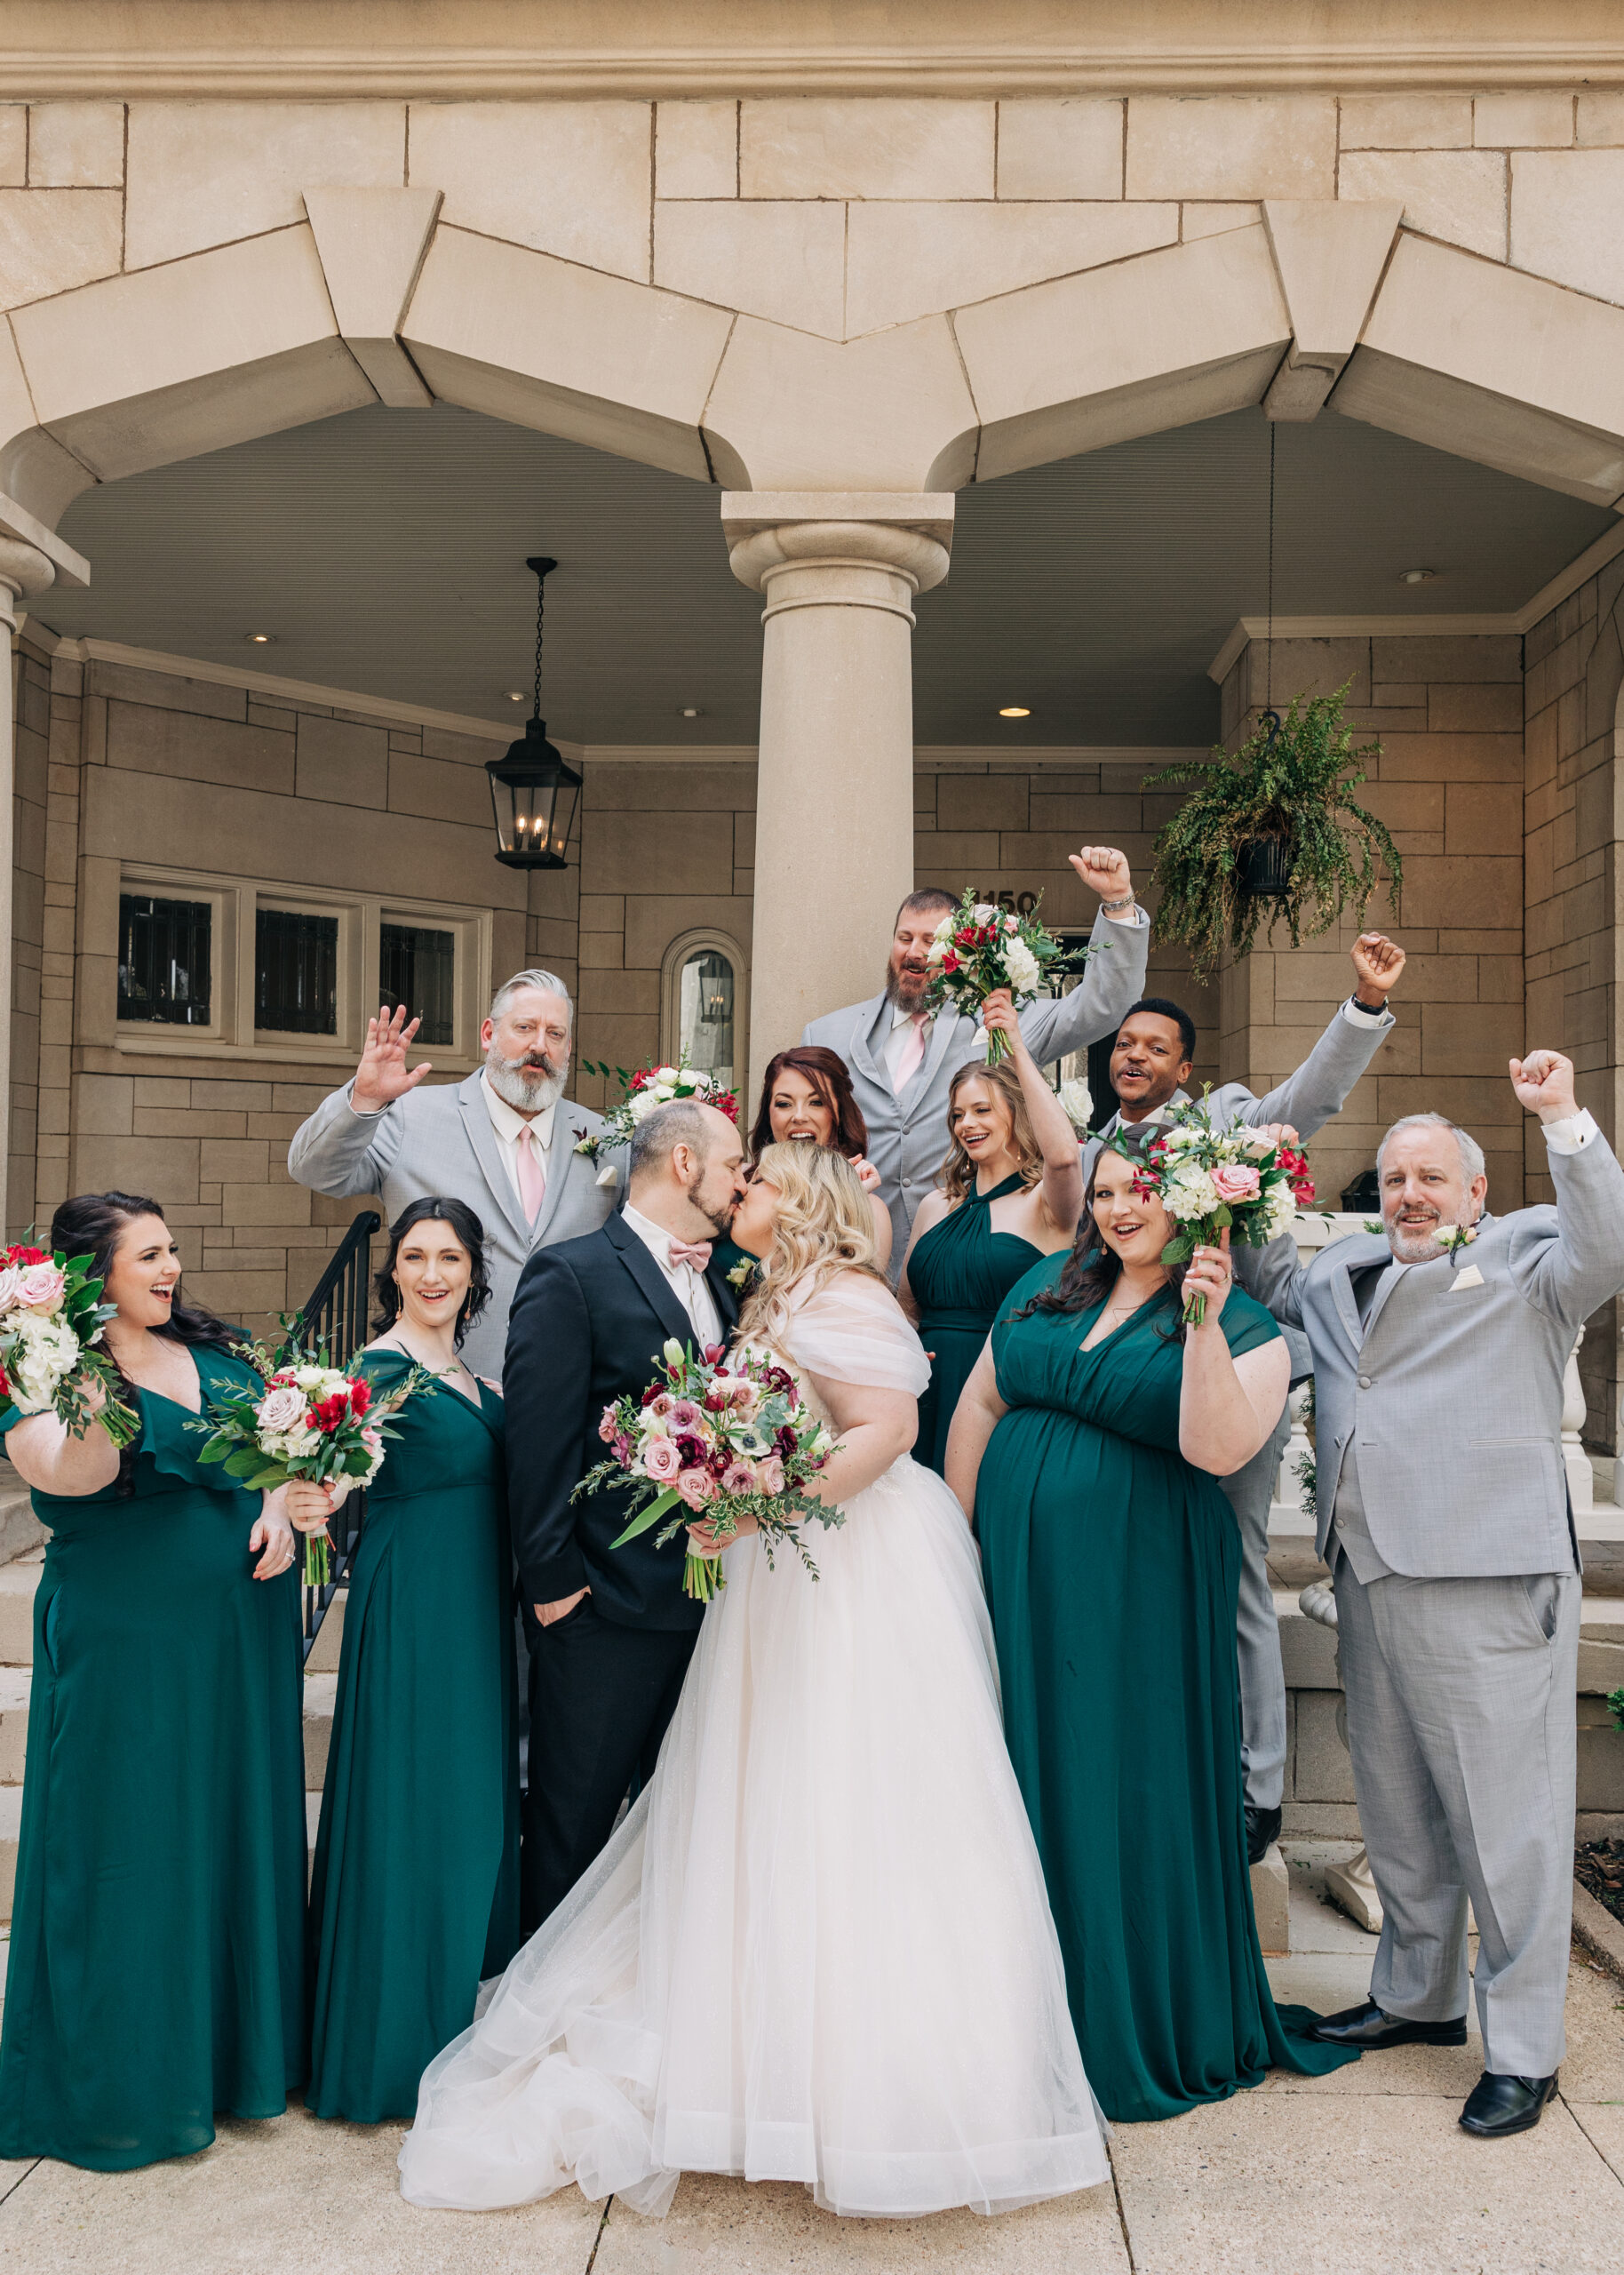 Newlyweds kiss on the front steps of their venue with their wedding party celebrating